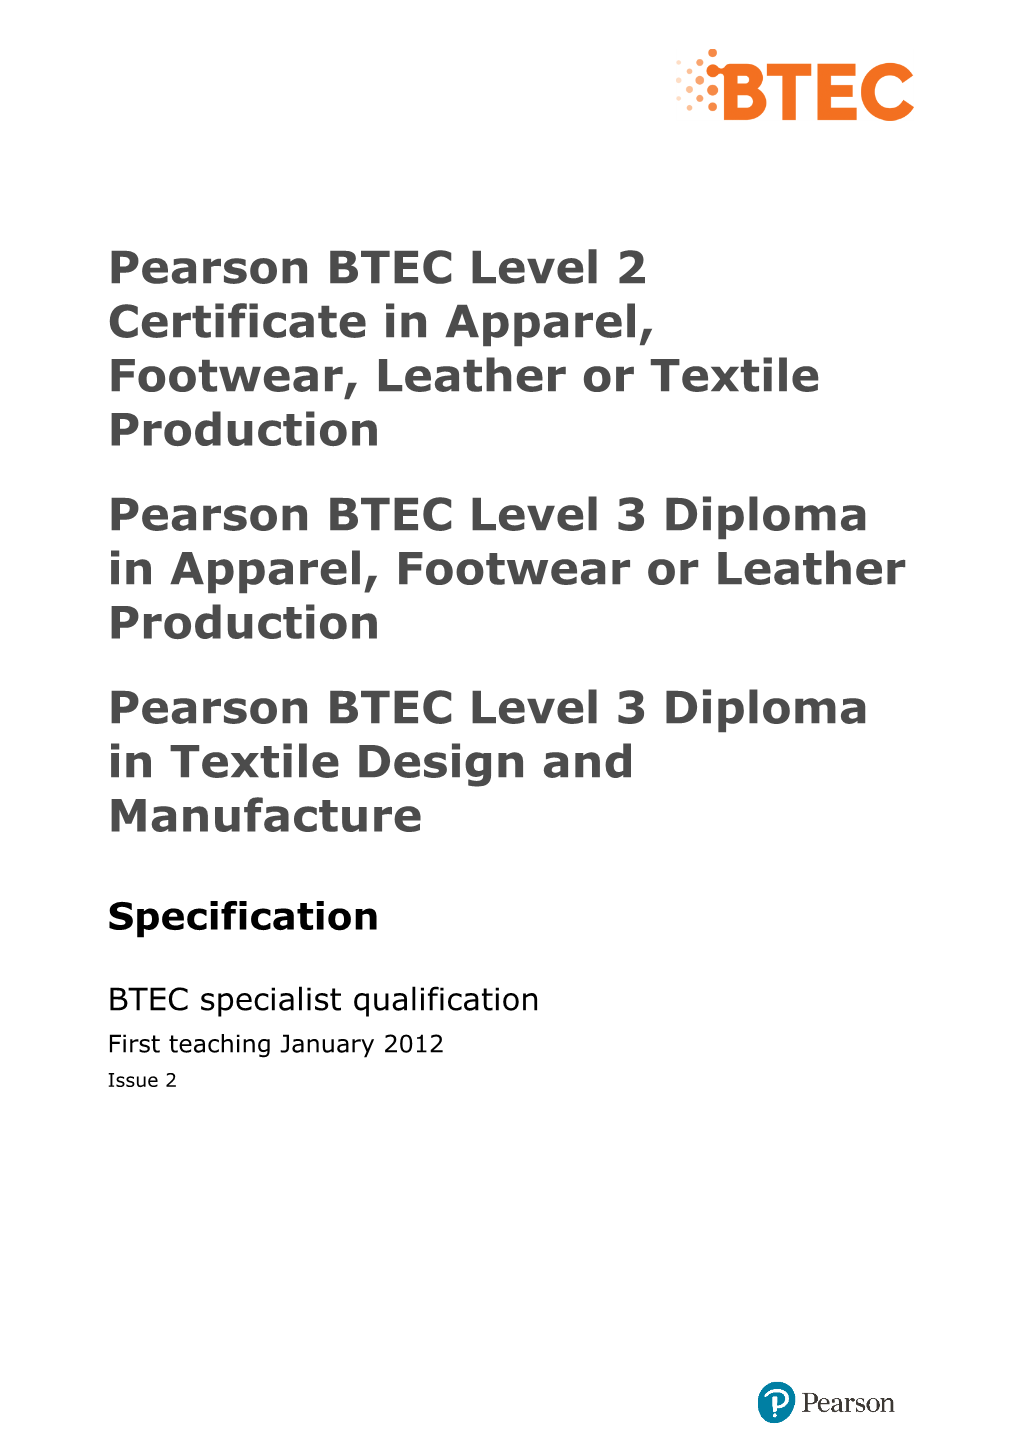 BTEC Specialist Qualifications Mixed Assessment